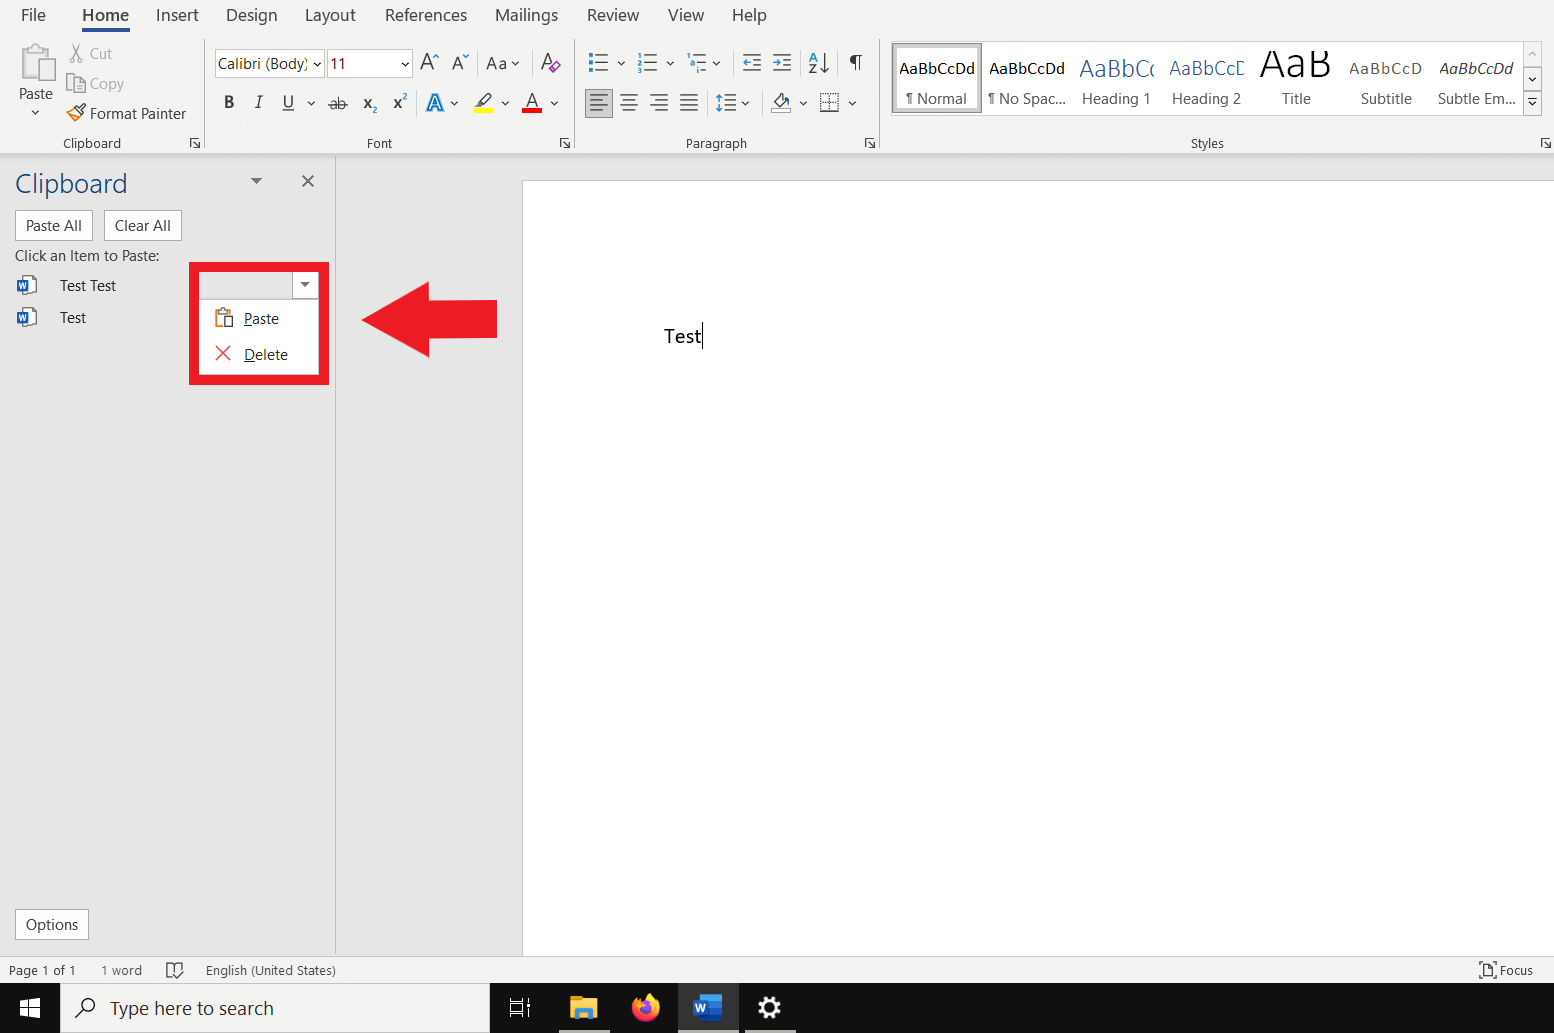 Paste item from clipboard into Word